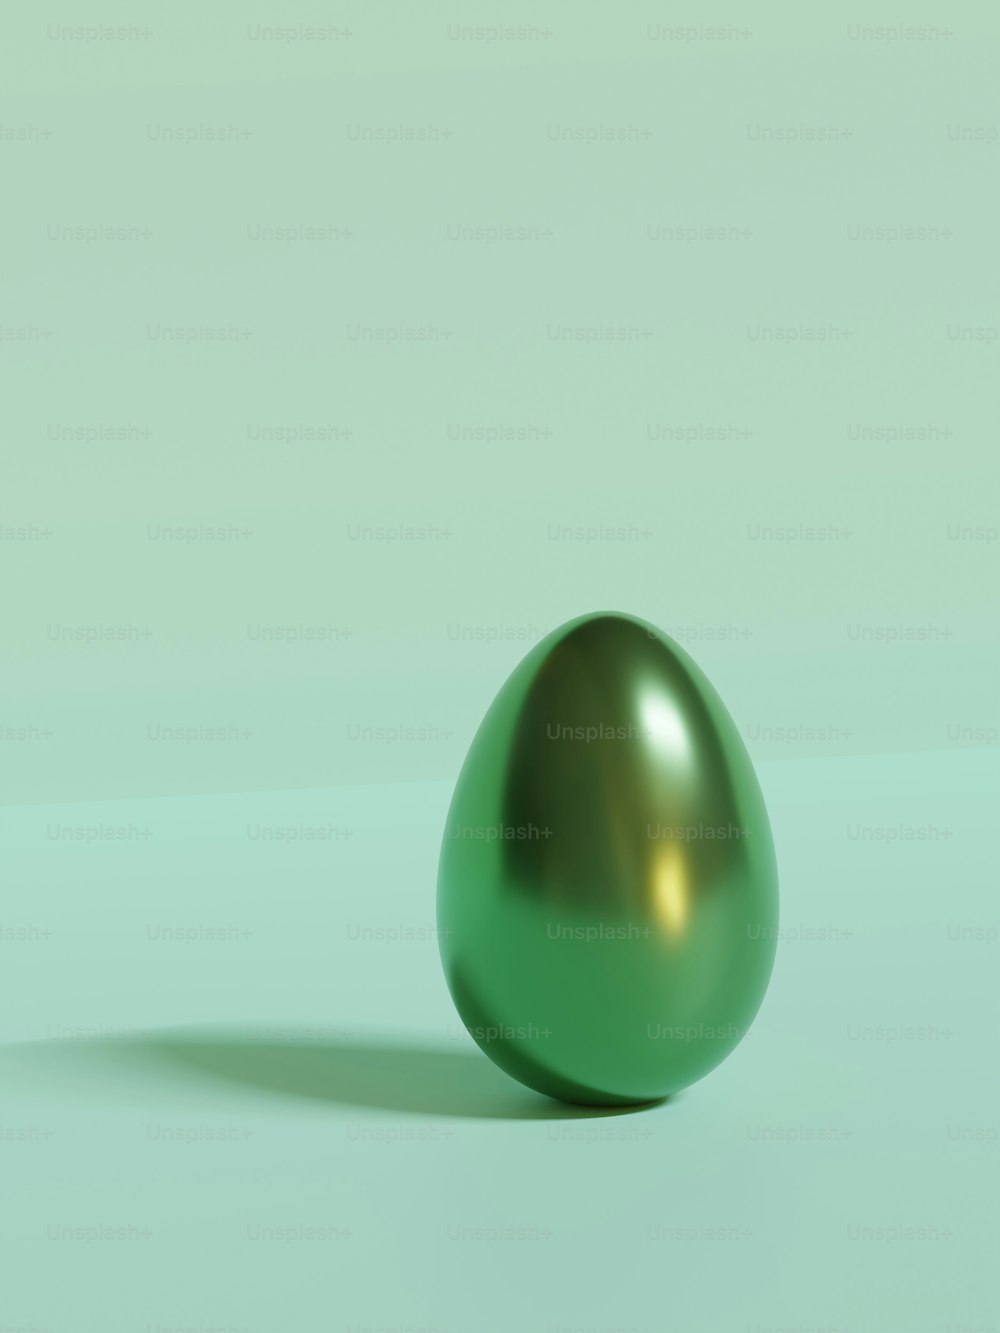 a shiny green egg on a pale green background